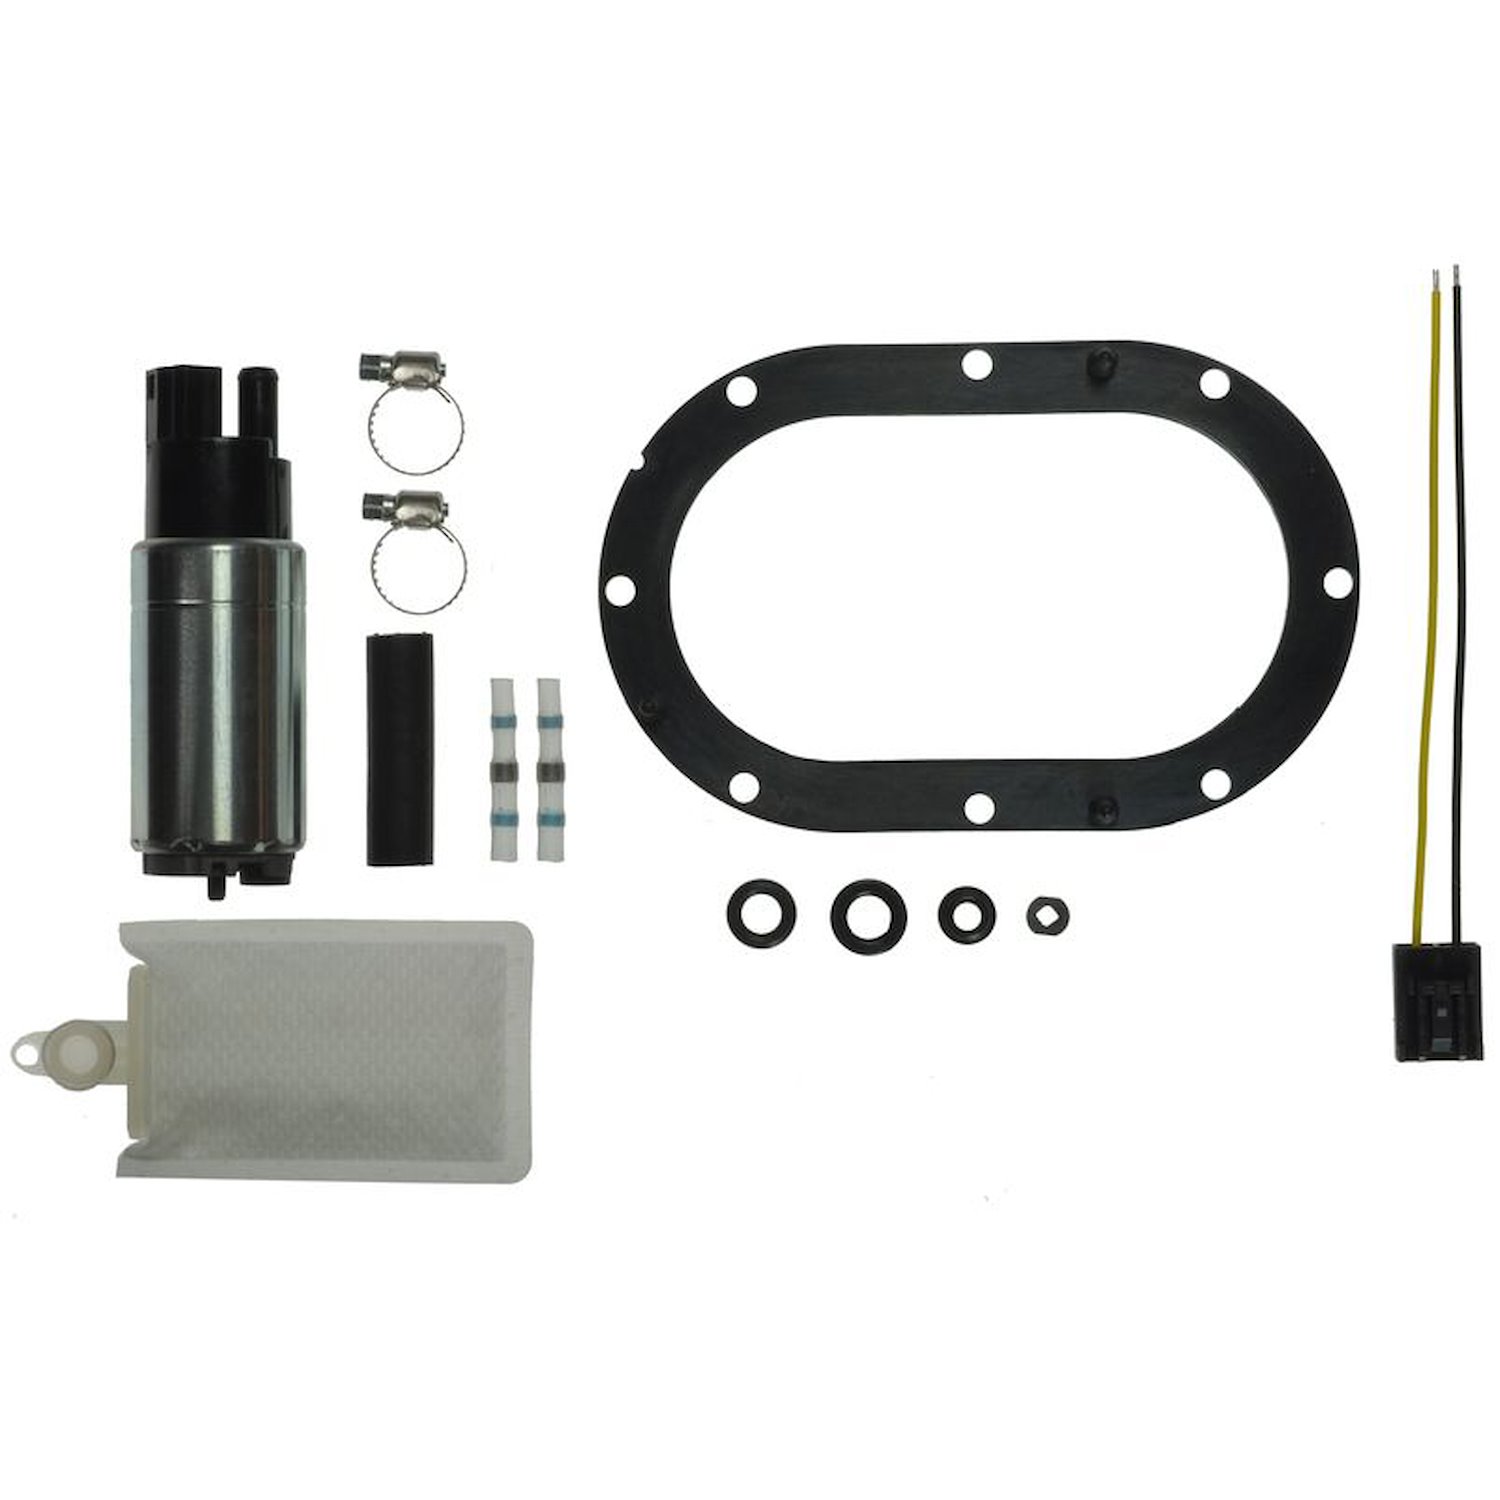 EFI In-Tank Electric Fuel Pump And Strainer Set for 2000-2001 Lexus ES300/2000-2004 Toyota Tundra